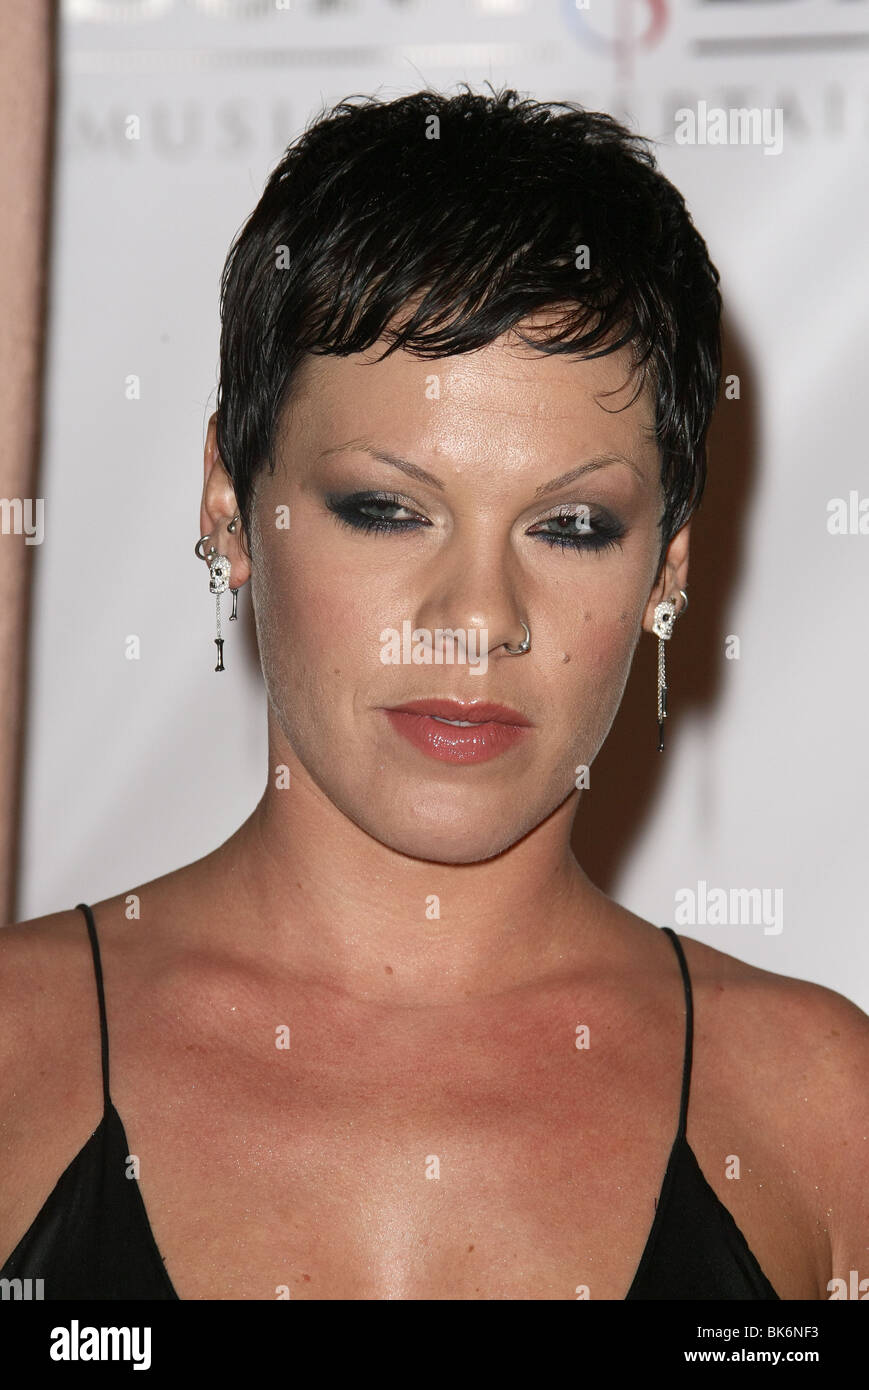 PINK SONY BMG 2008 GRAMMY AWARDS PARTY BEVERLY HILLS HOTEL LOS ANGELES USA 10 February 2008 Stock Photo